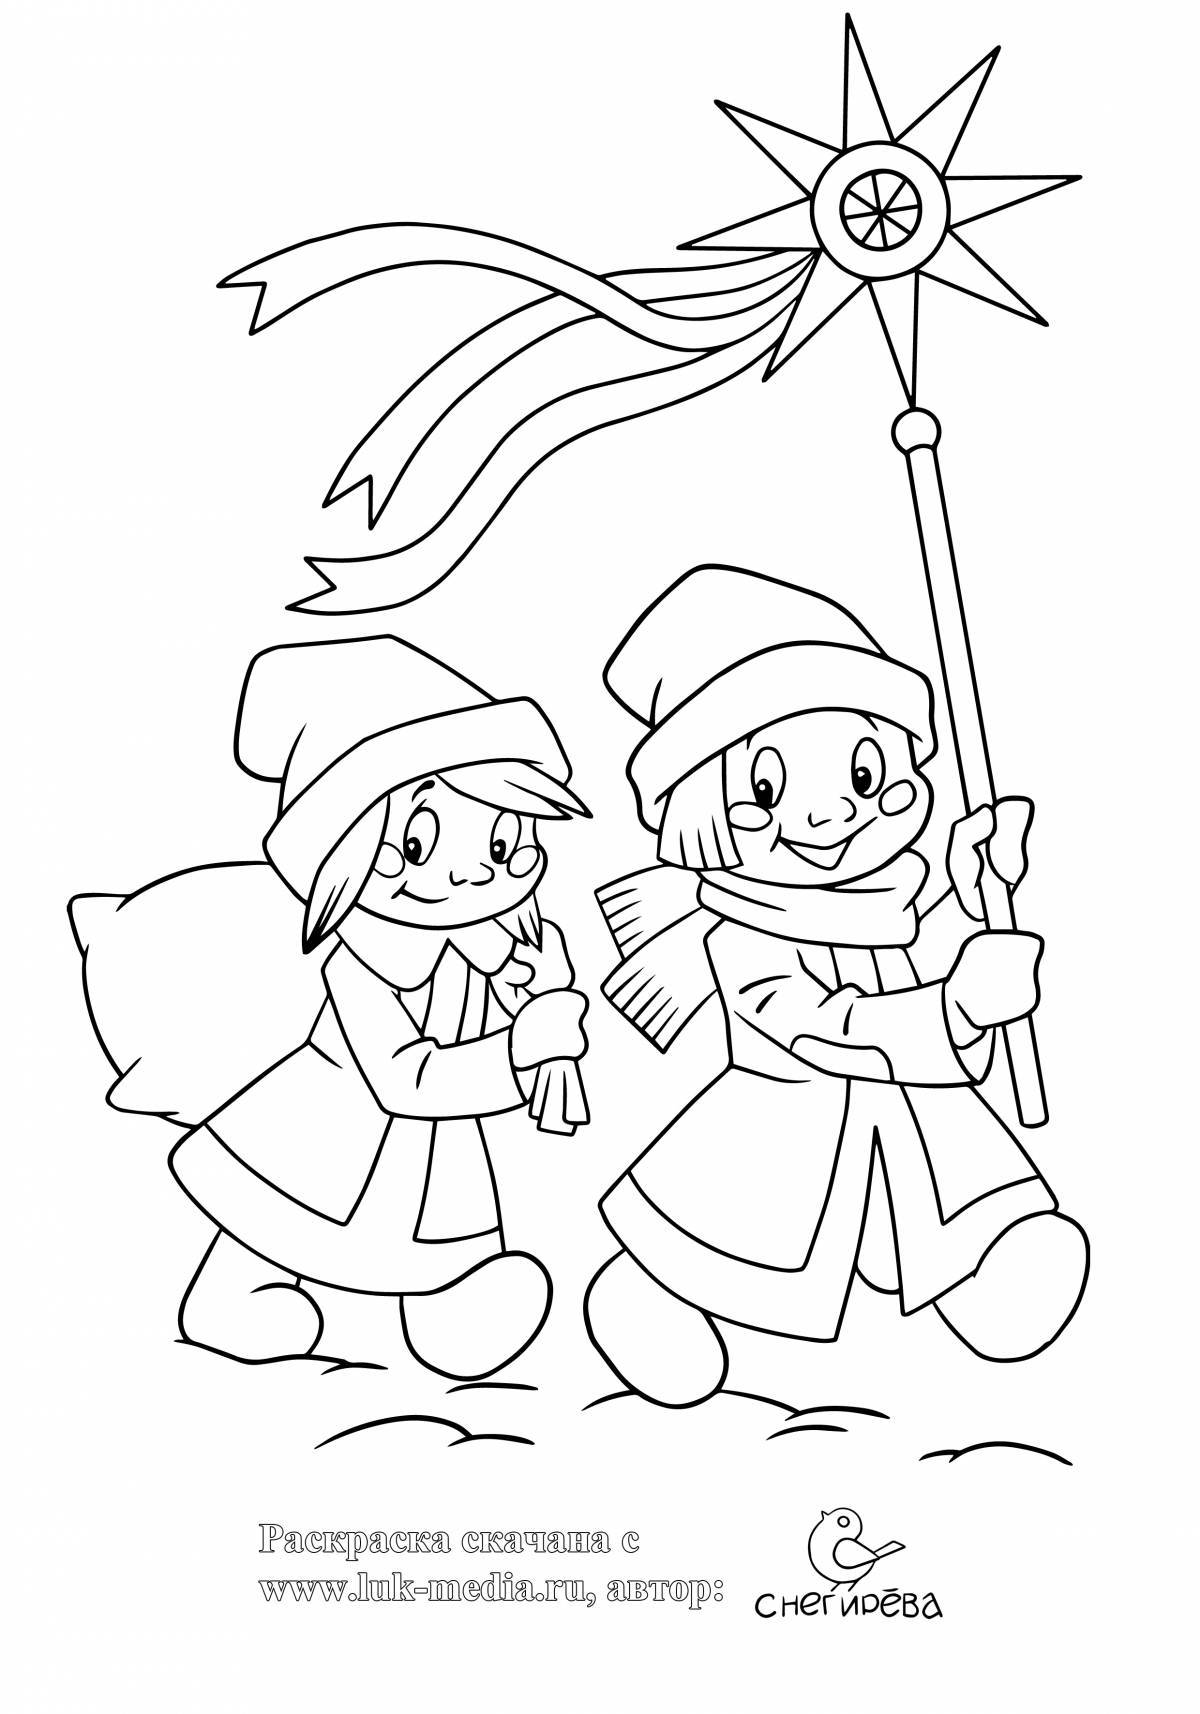 Children's Christmas carol coloring pages